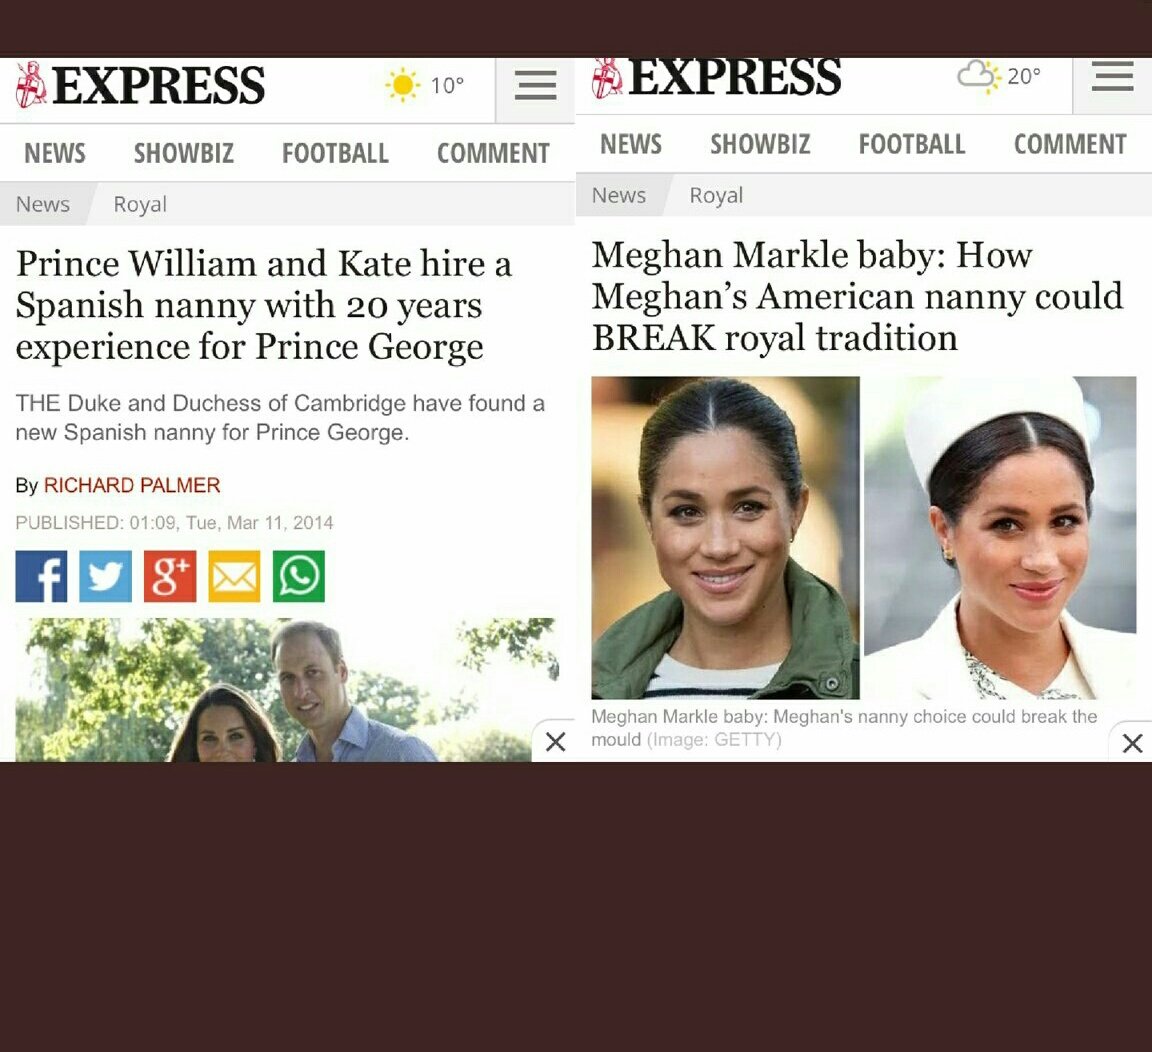 Ok guys bear with me. These leaks are coming out almost every day, Meghan’s name is being tarnished, while Kate is being boosted up. May I also please mention that these attacks are happening while MEGHAN IS PREGNANT AND VULNERABLE. Anyway…